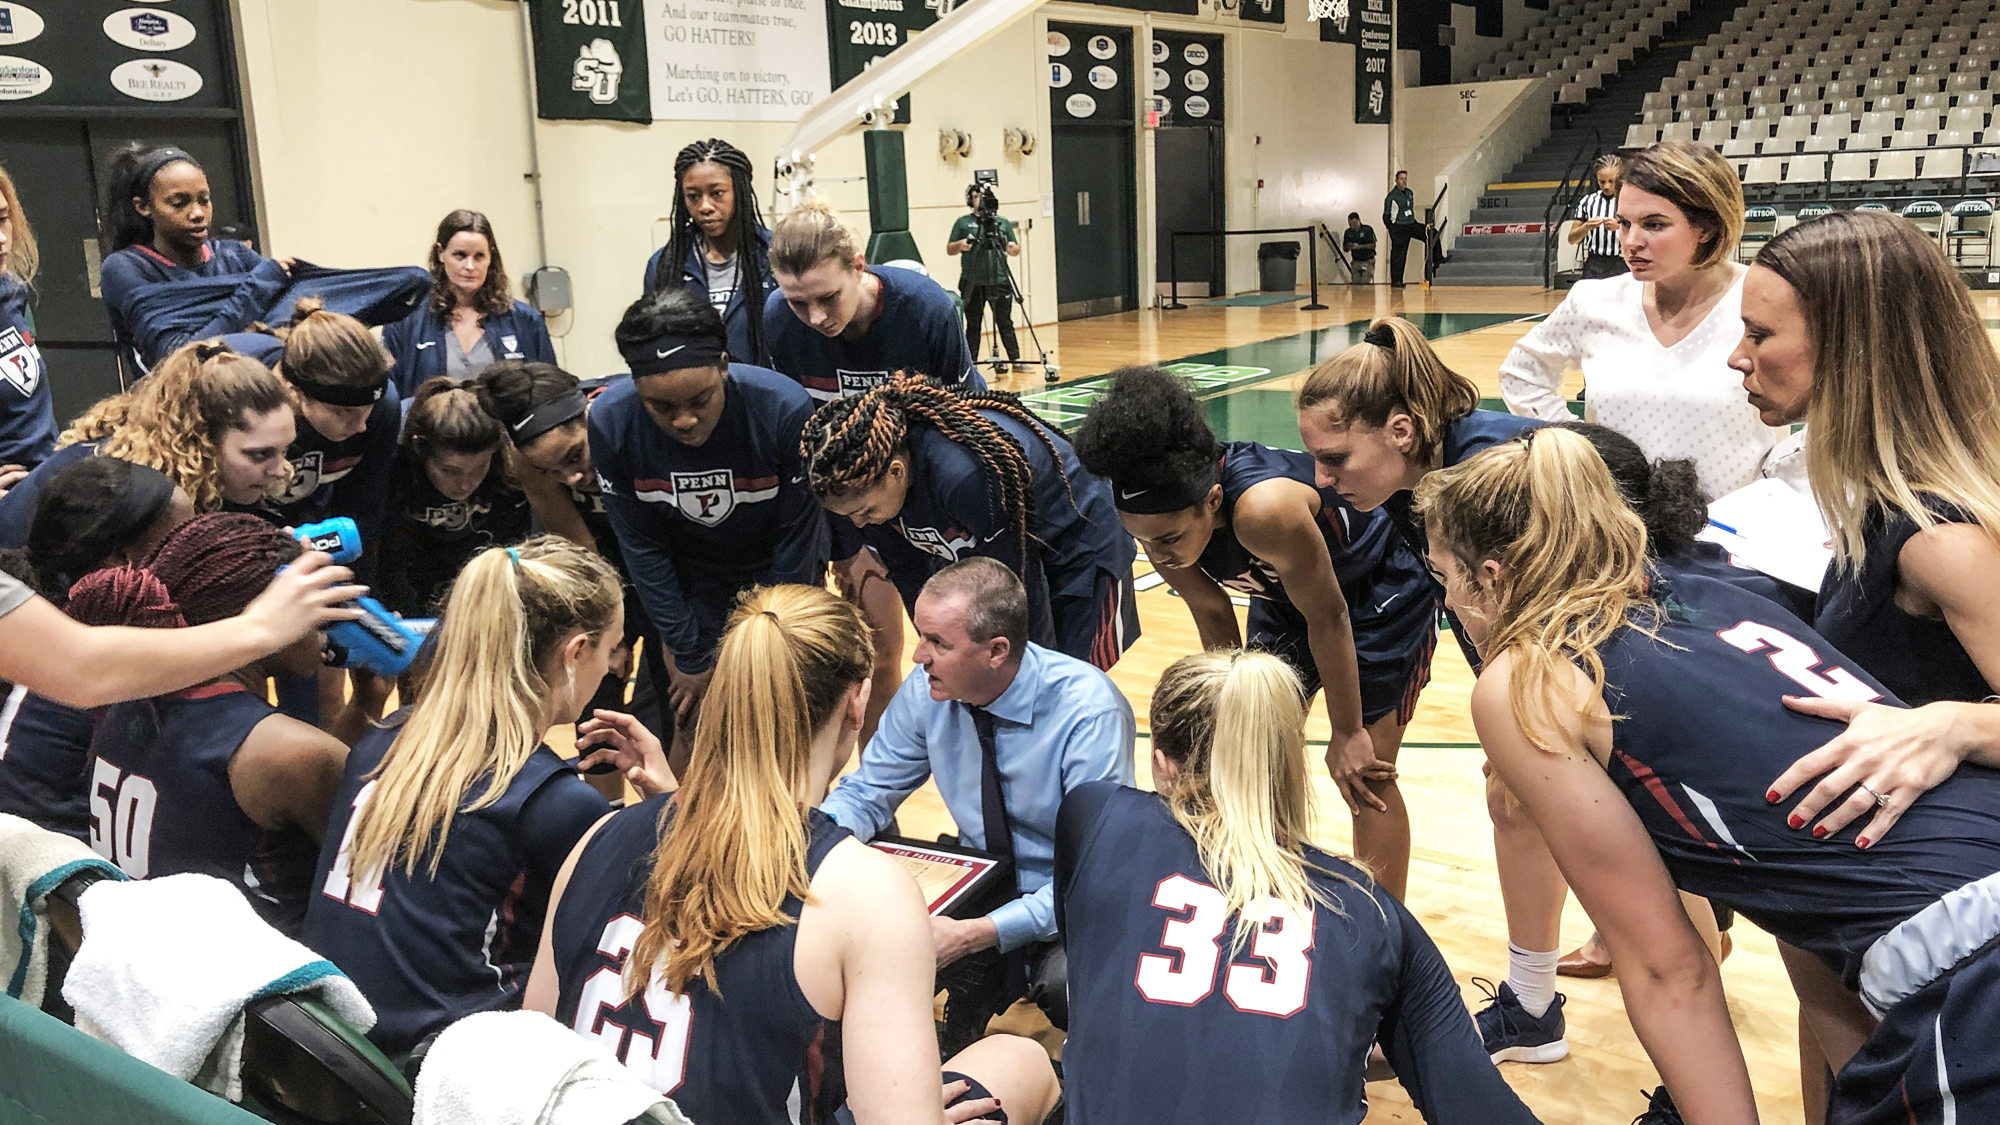 The women's basketball team and coach huddle on the sidelines during a game against Stetson